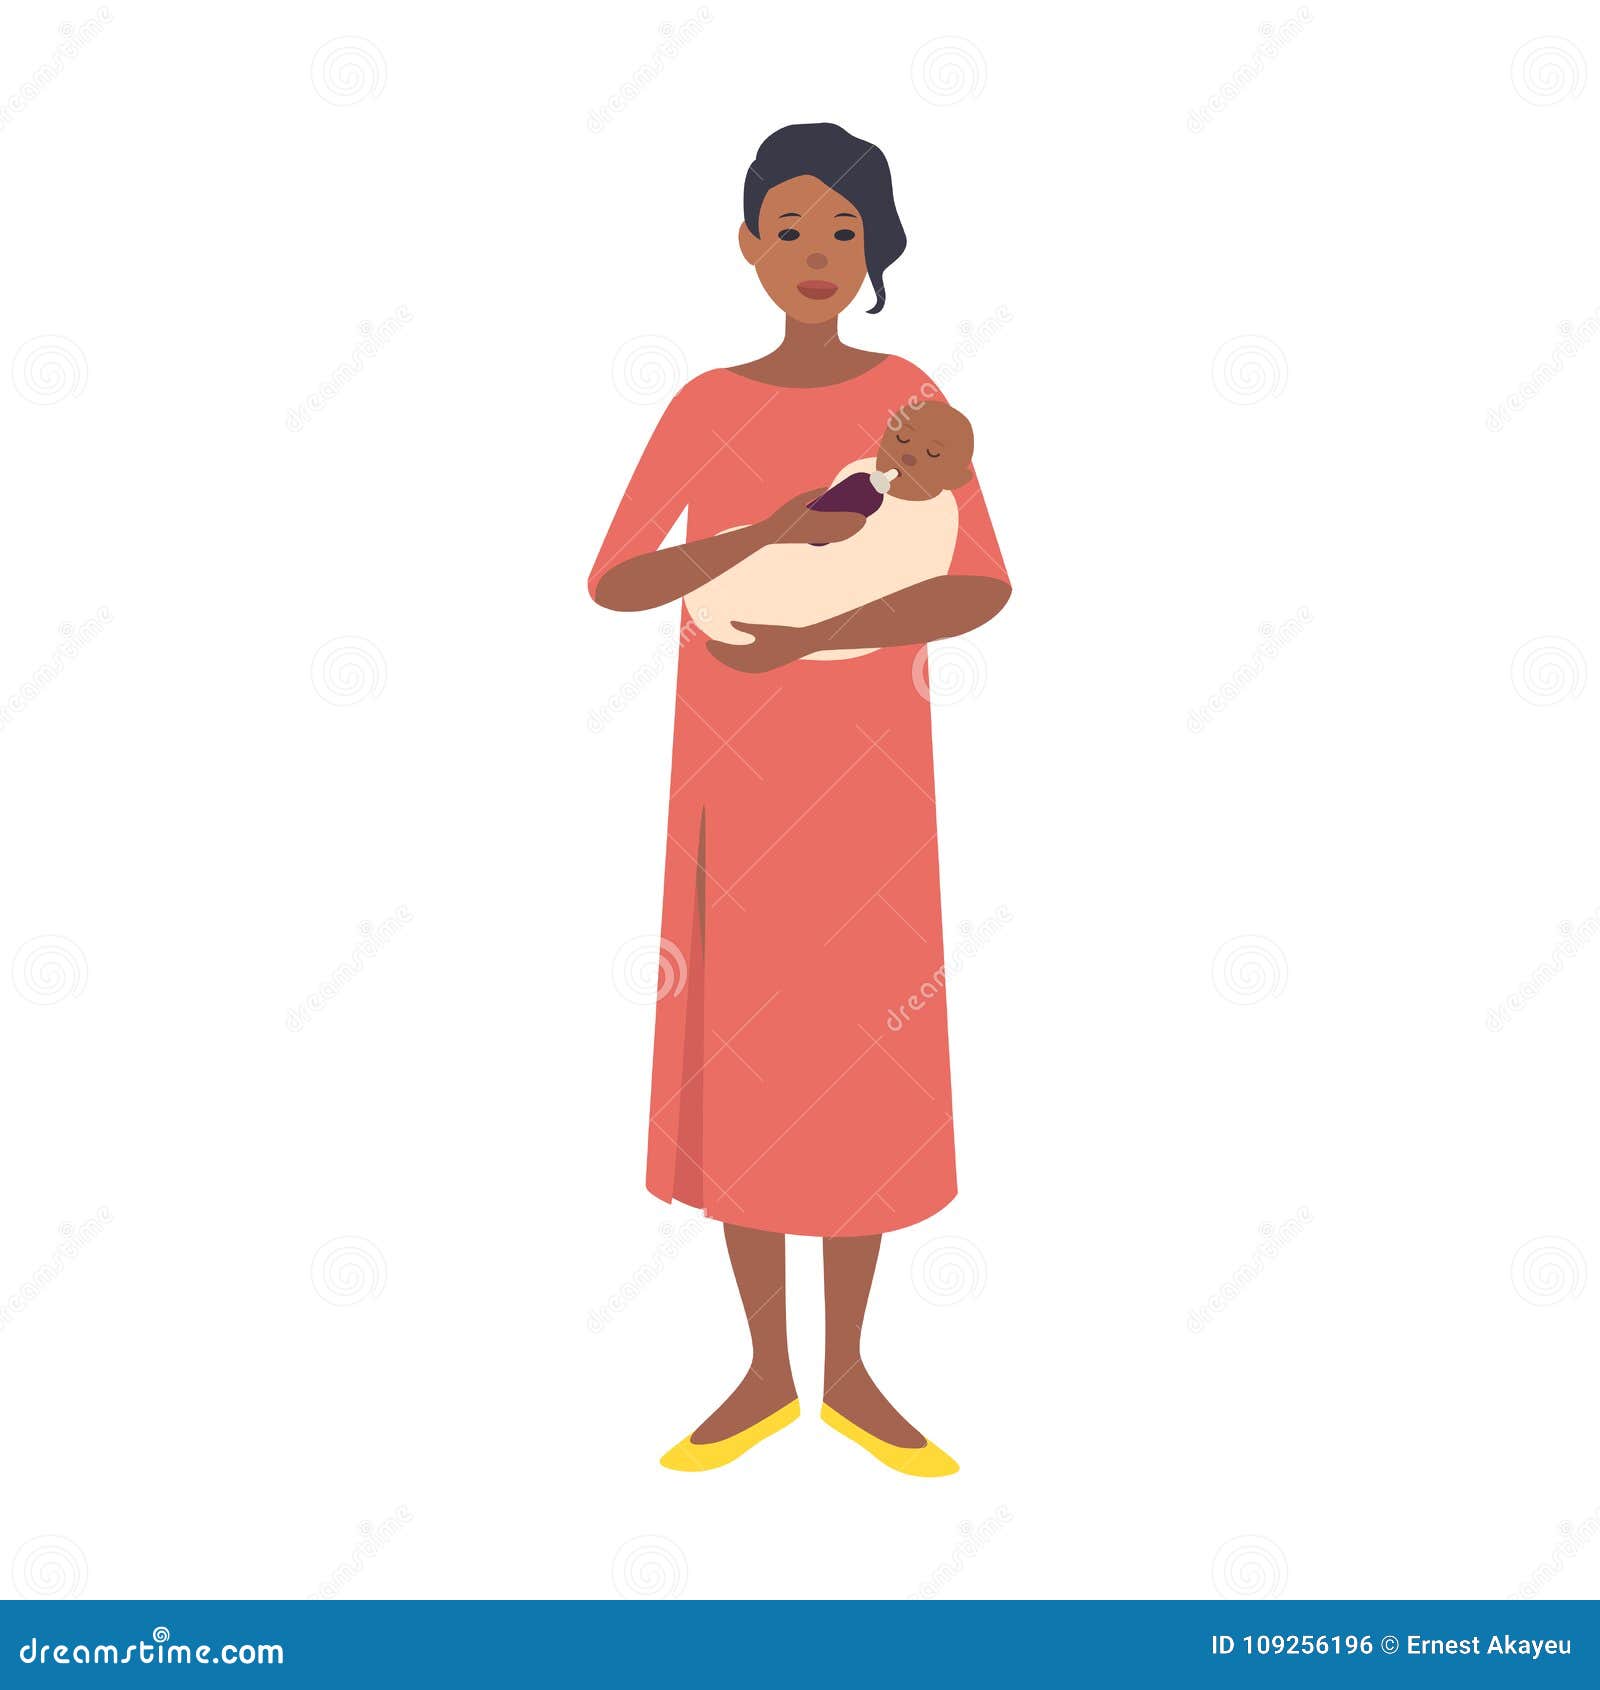 mother bottle feeding baby. young woman wearing long pink dress holding infant or newborn child. cute flat female